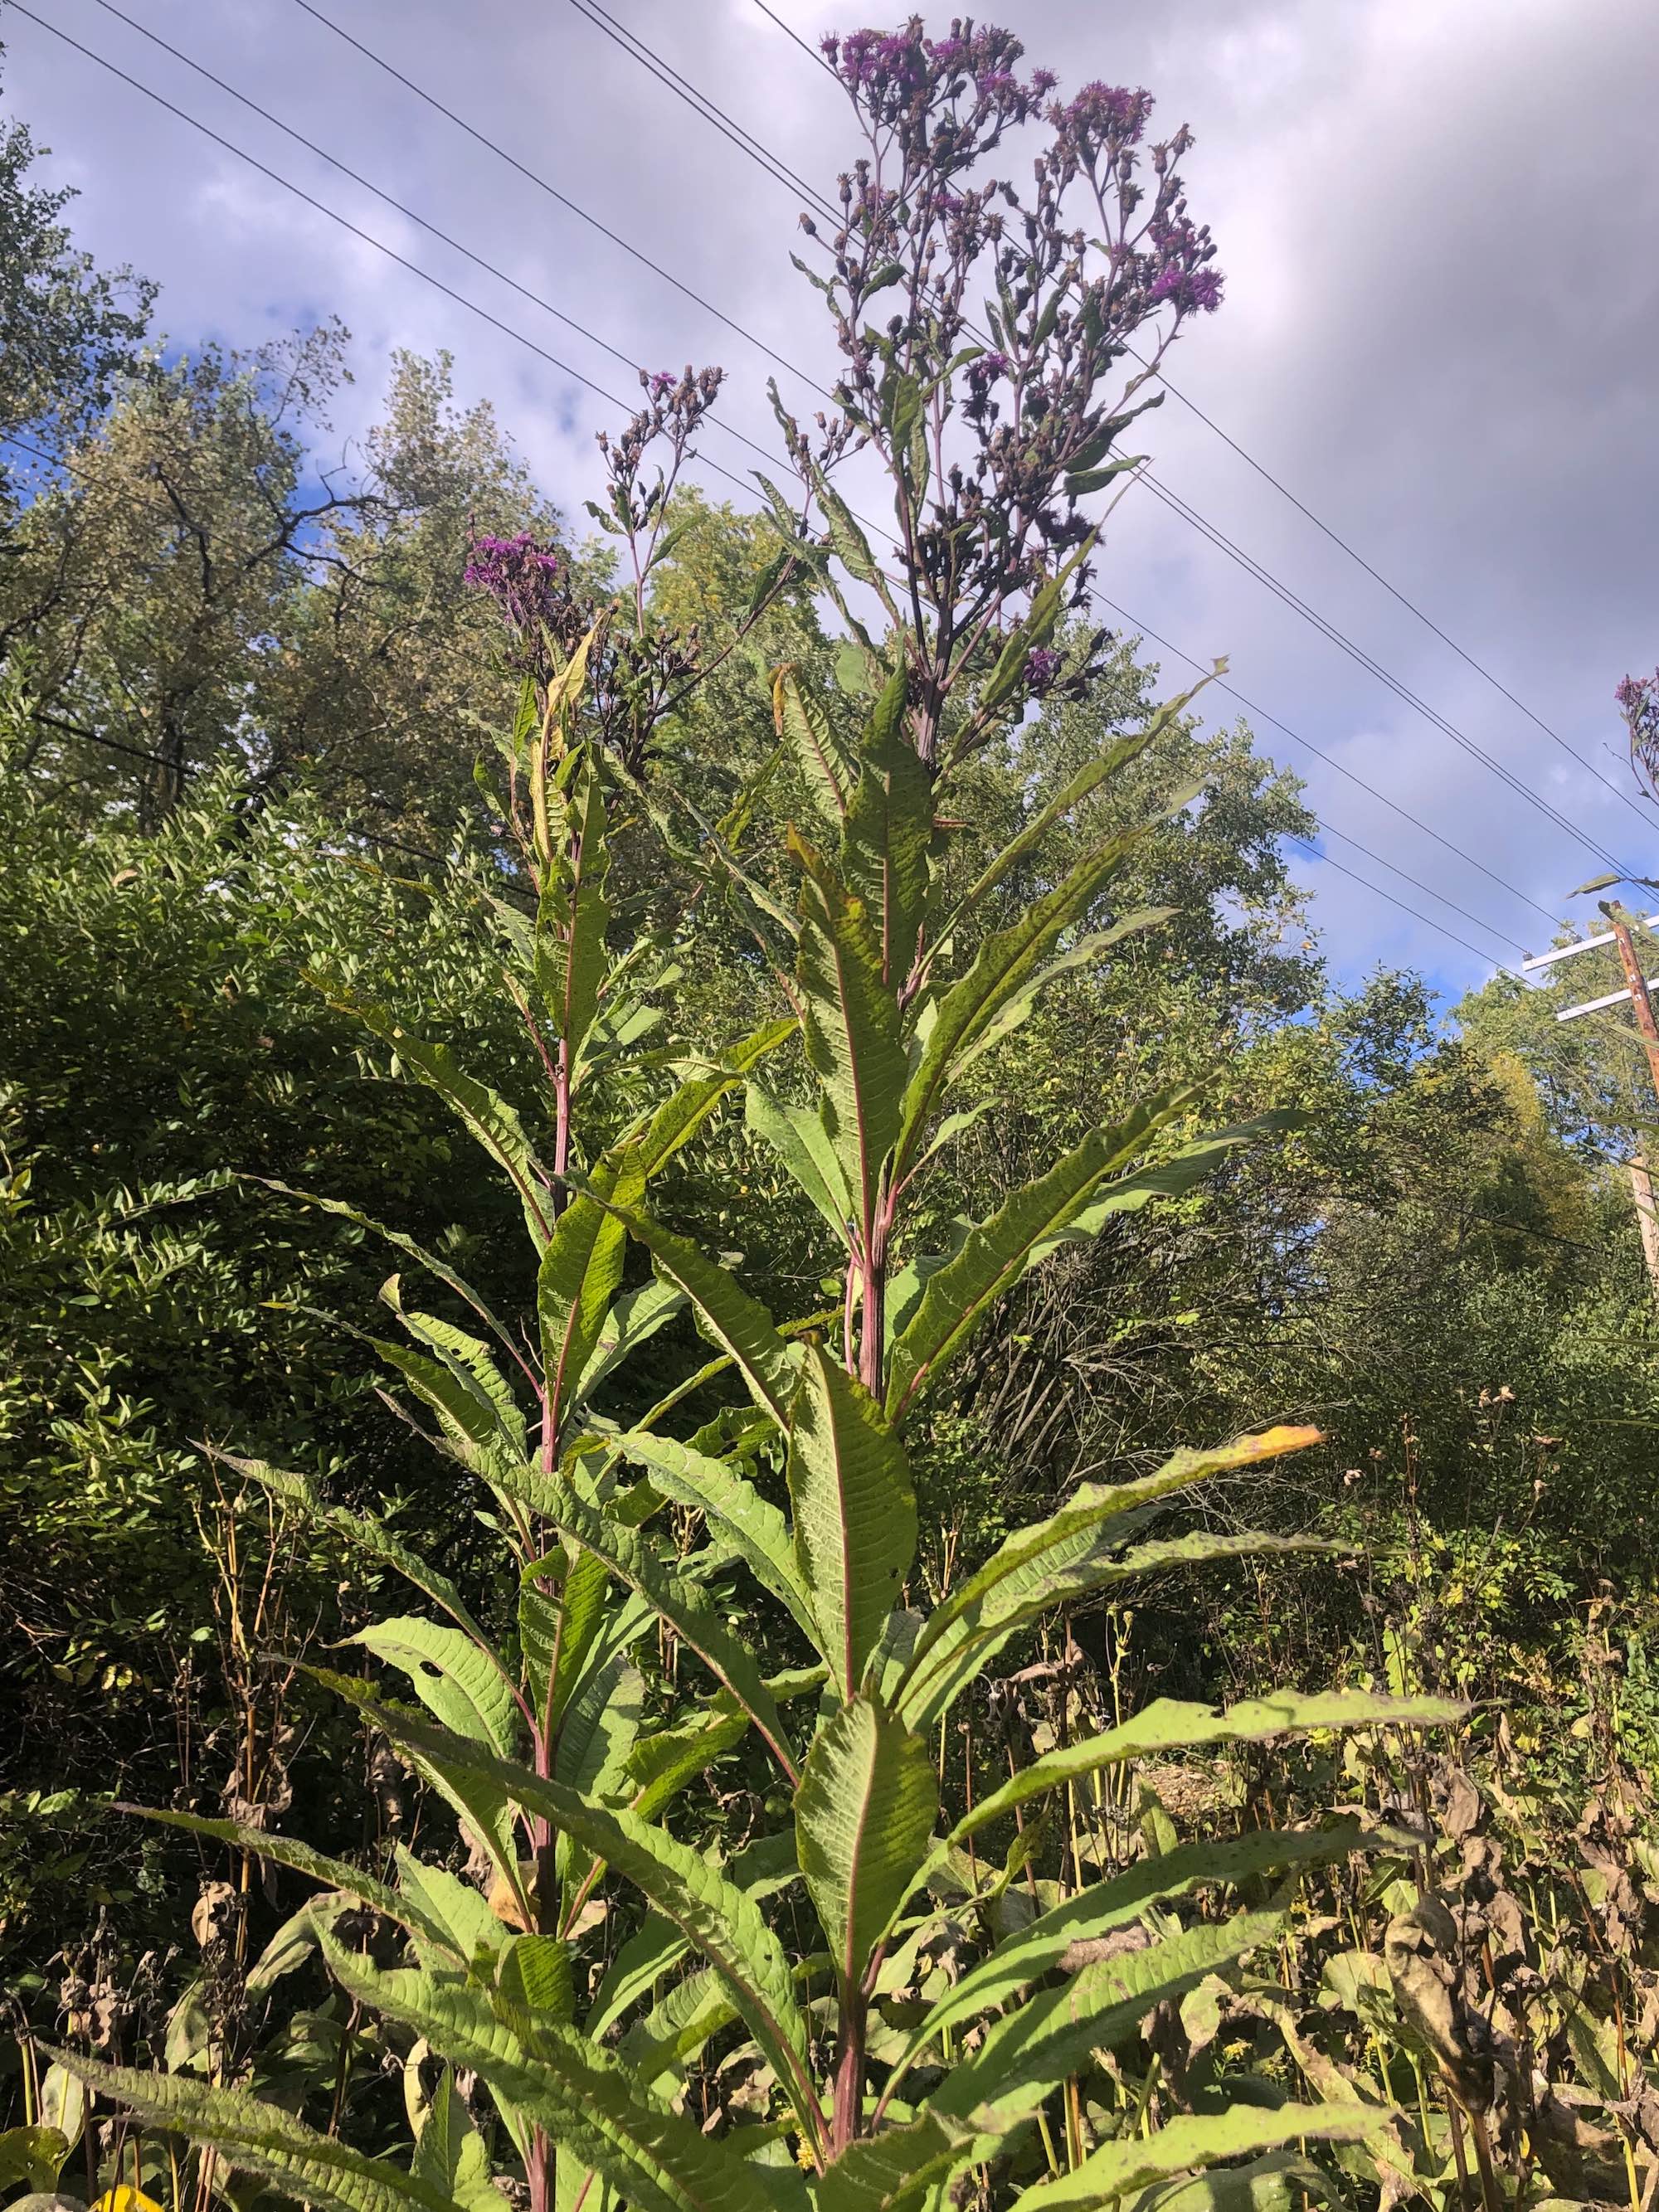 Tall Ironweed in drainage ditch along bikepath between Midvale Blvd. and the Beltline on September 30, 2020.